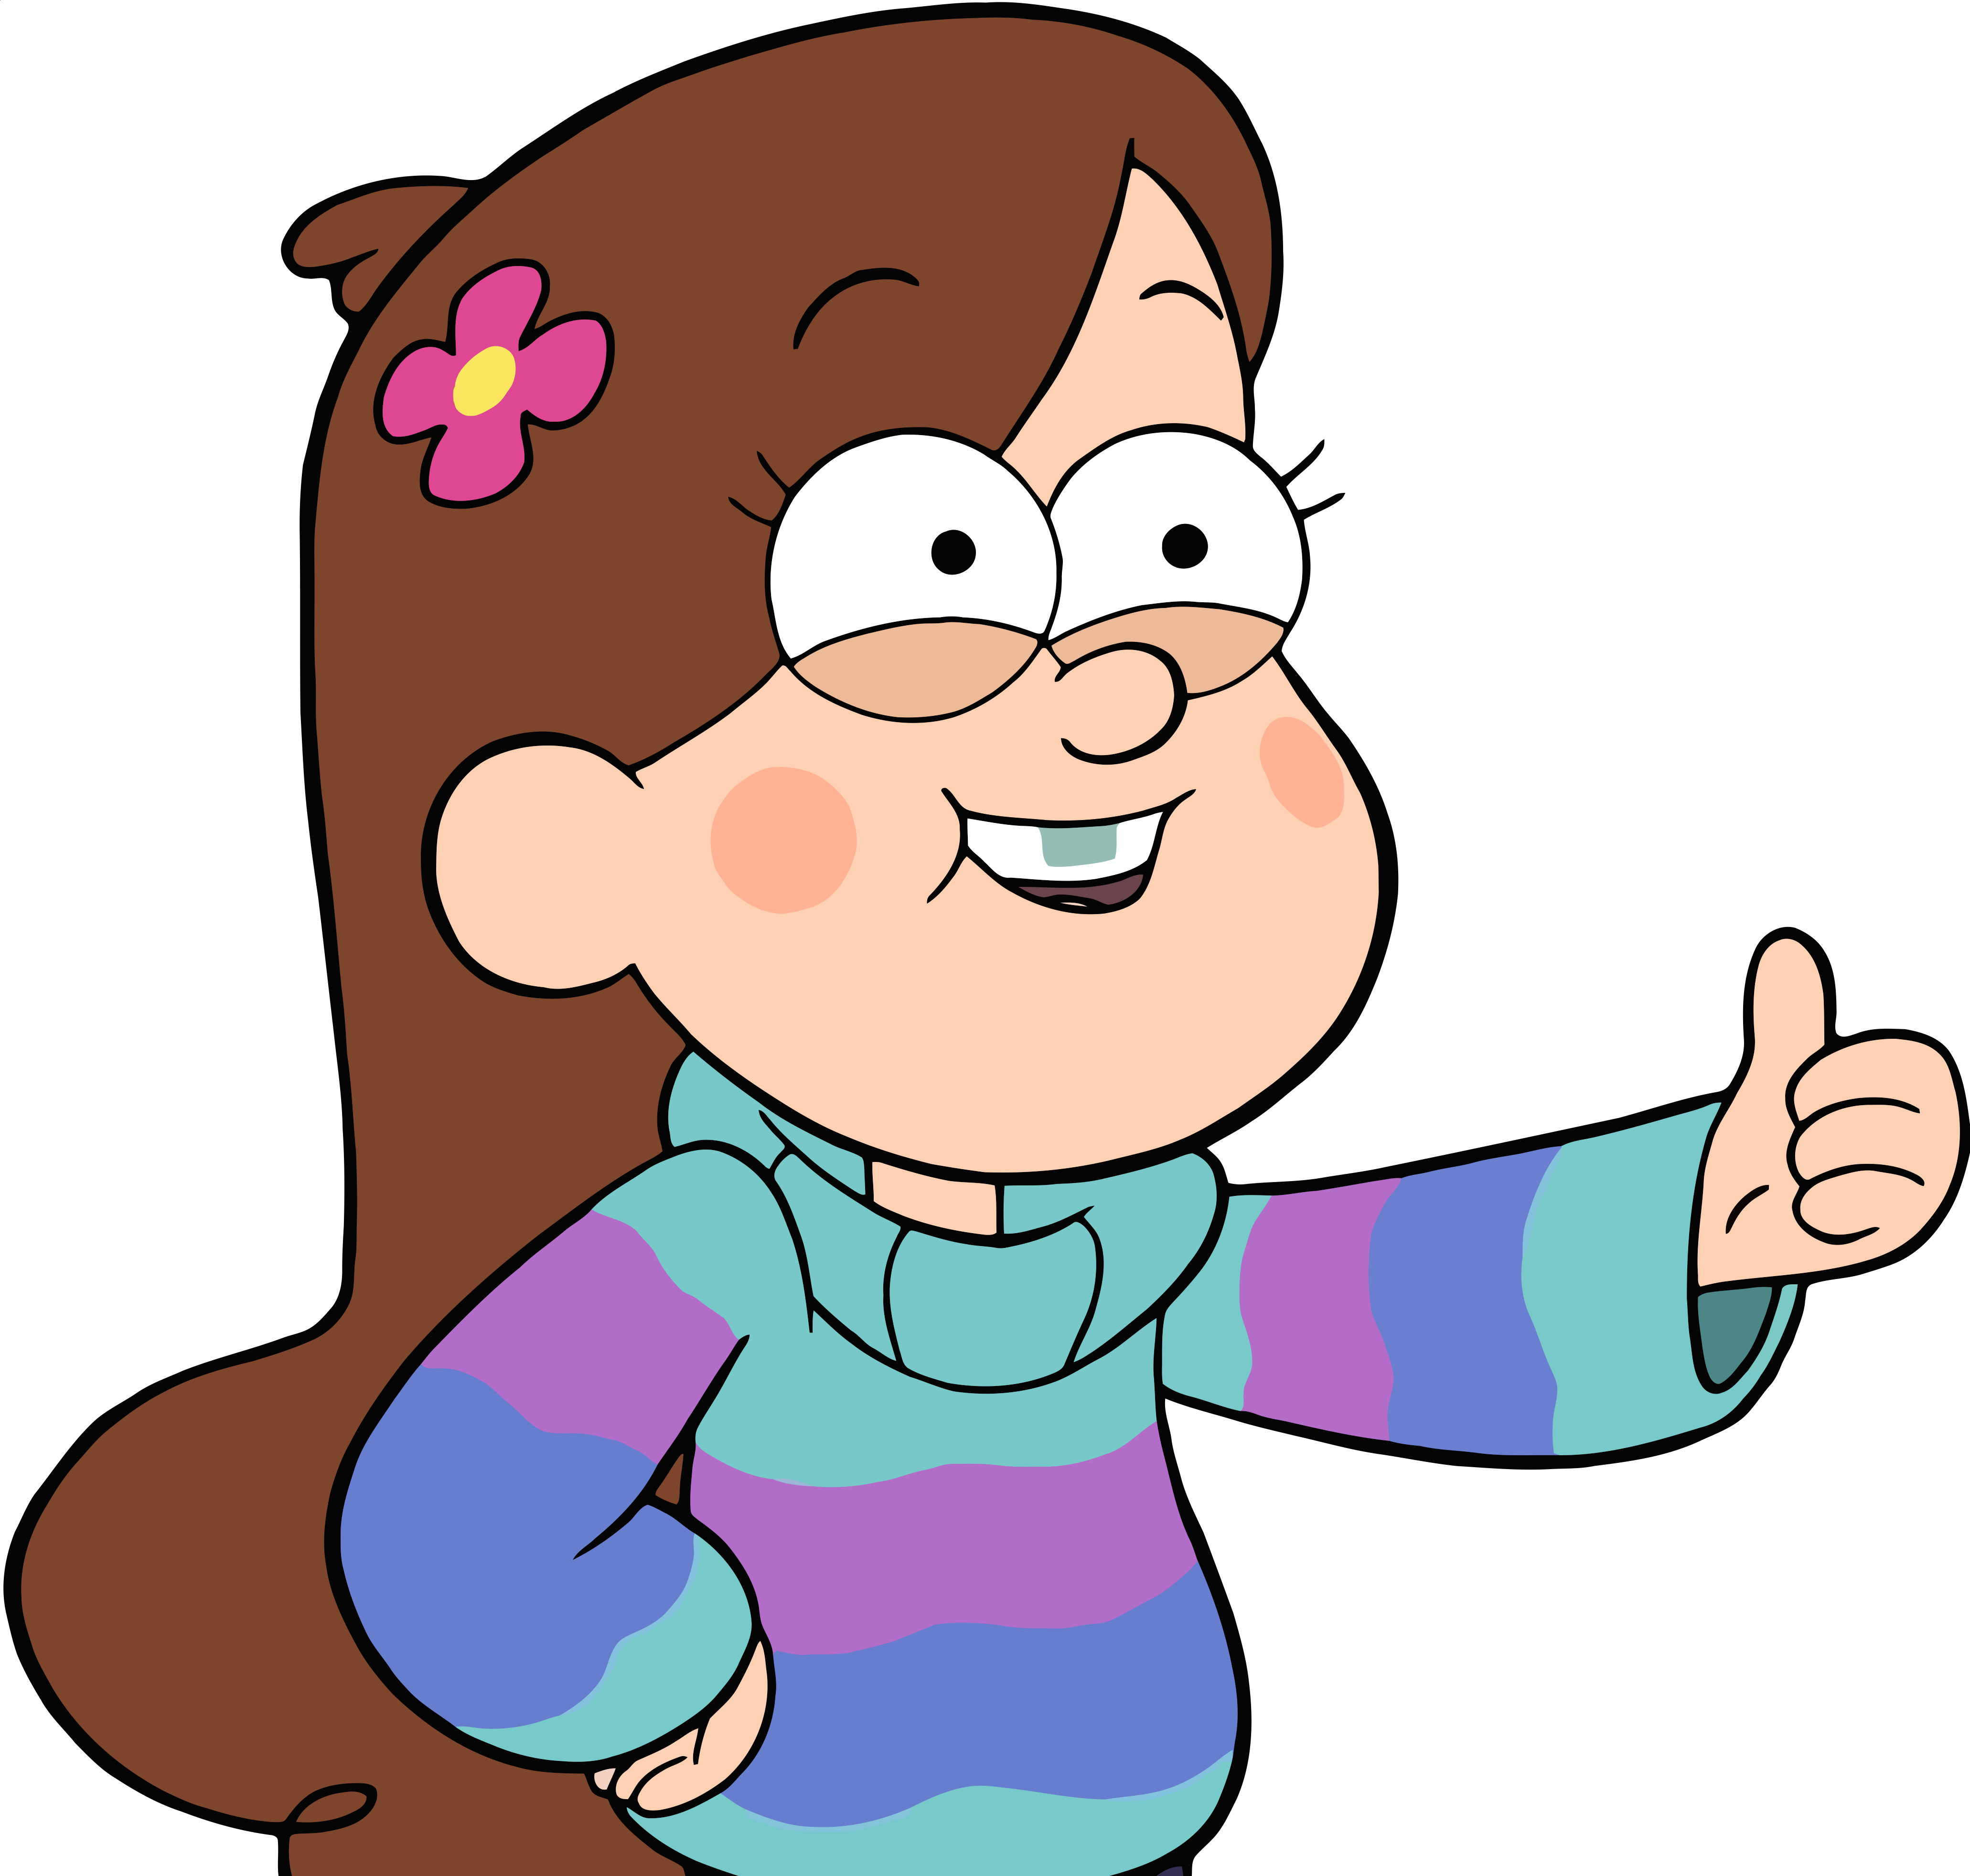 Image - S1e9 mabel thumbs up transparent - Gravity Falls Wiki 